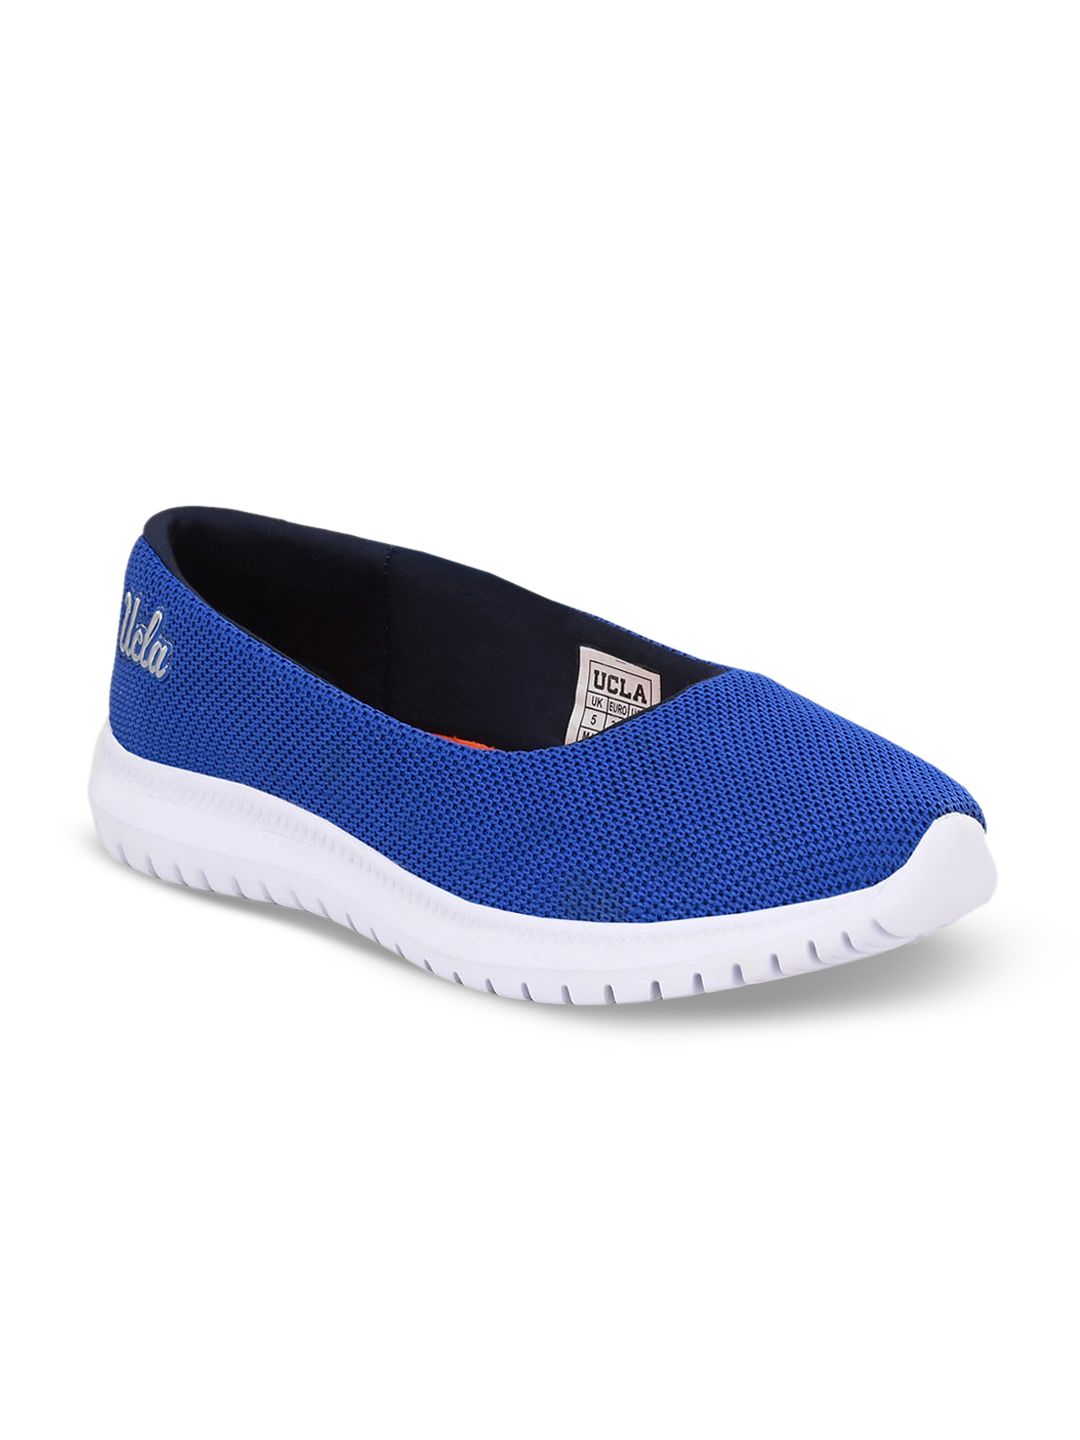 UCLA Women Blue Walking Shoes Price in India